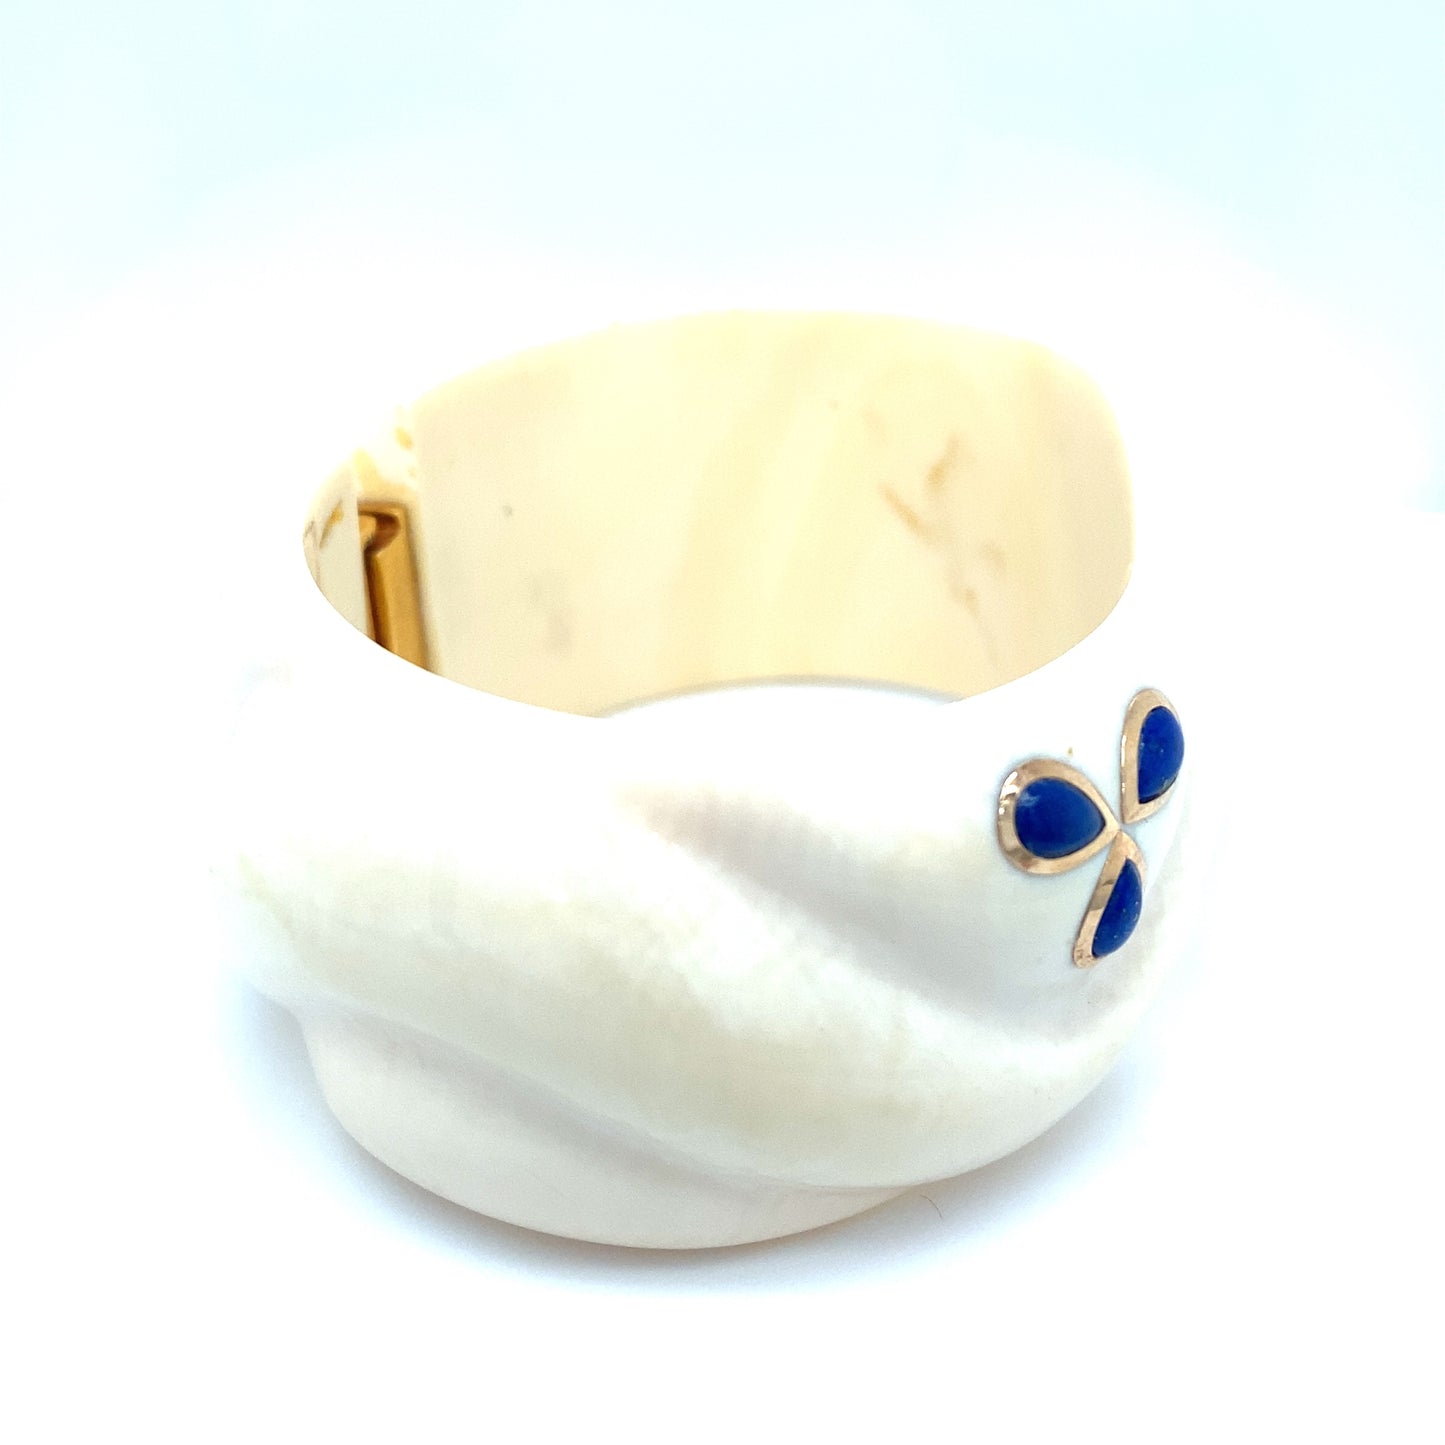 Circa 1960s Resin and Lapis Lazuli Hinged Bangle with 14K Gold Accents